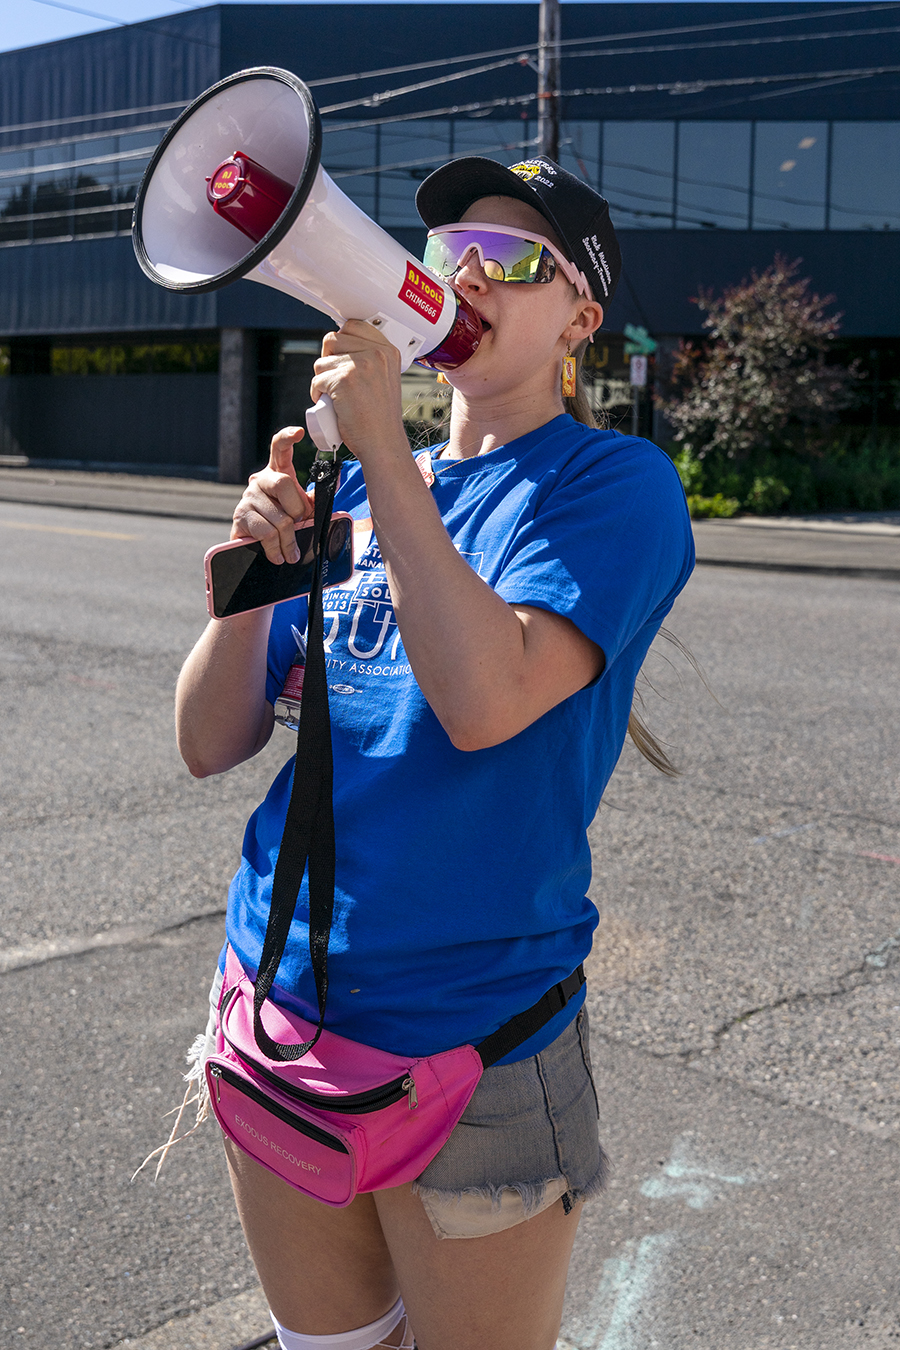 A person holds a megaphone and speaks into it.